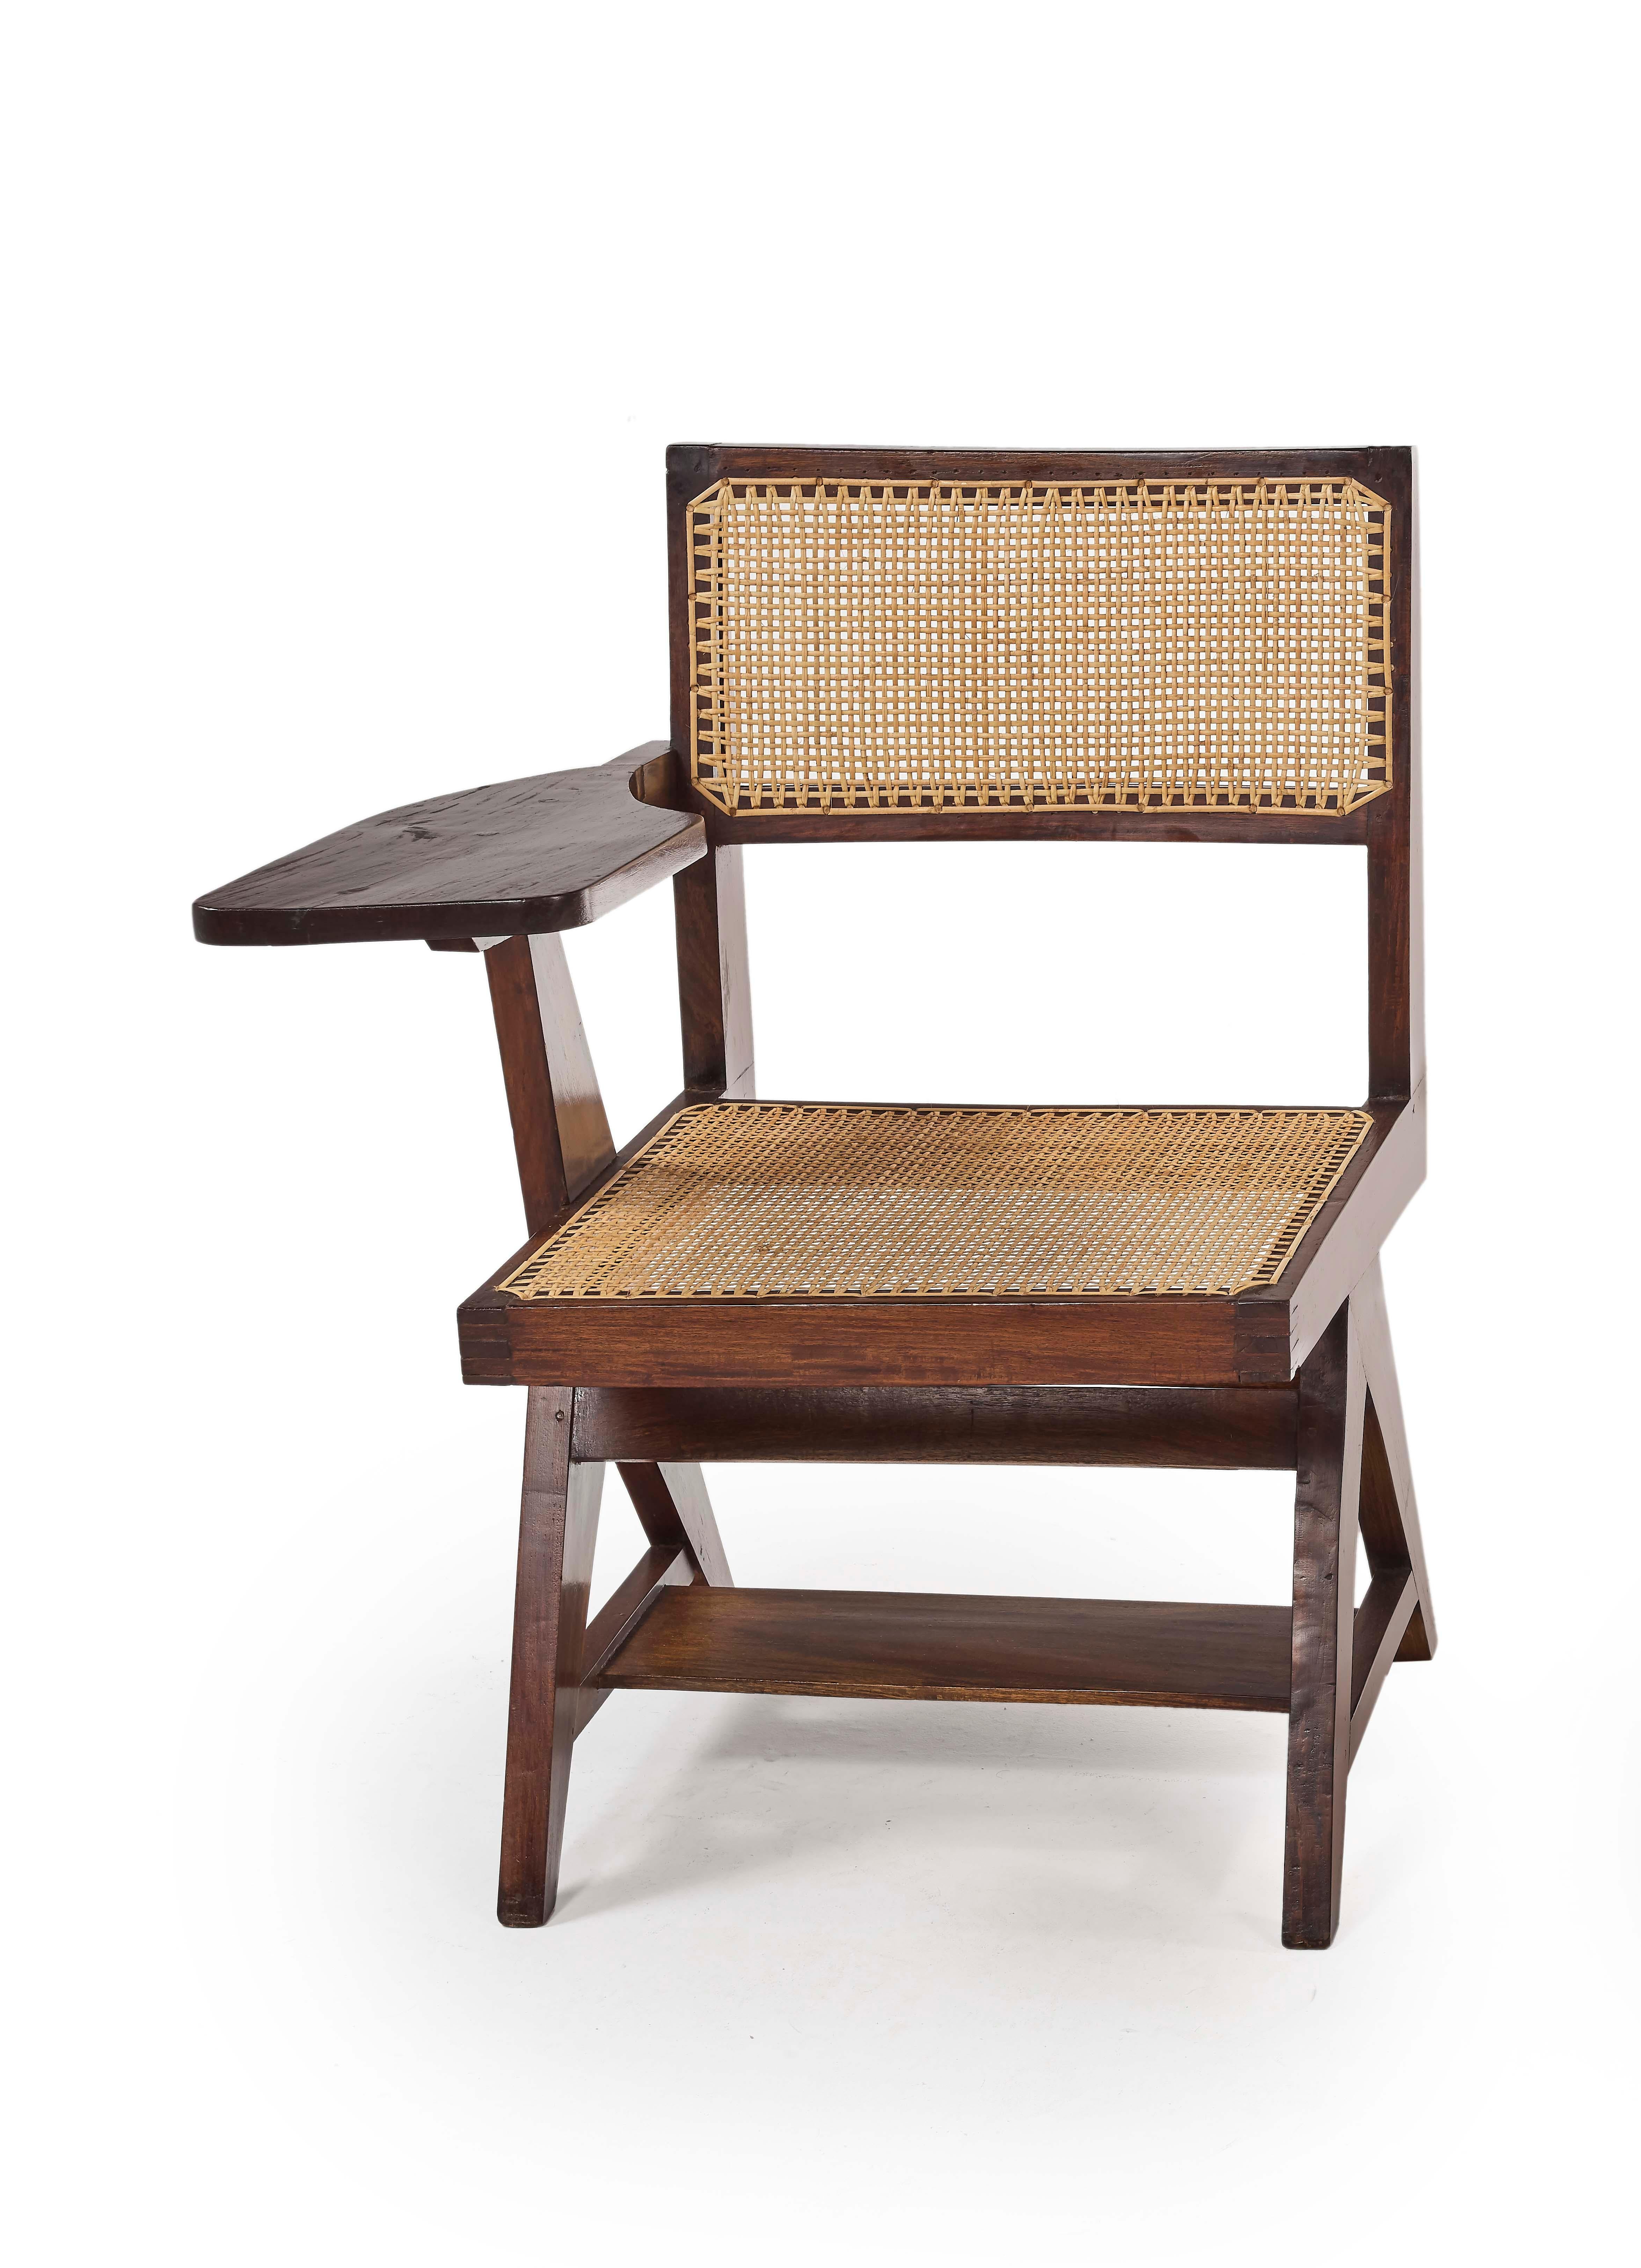 Pierre Jeanneret
Writing chair, circa 1960 
PJ-SI-26-A
Solid teak.
Version with right leg in inversed “Y” which support a tablet. Solid teak, cane.
Tablet under seat.
Provenance : Punjab University, Chandigarh, India
A model is in the